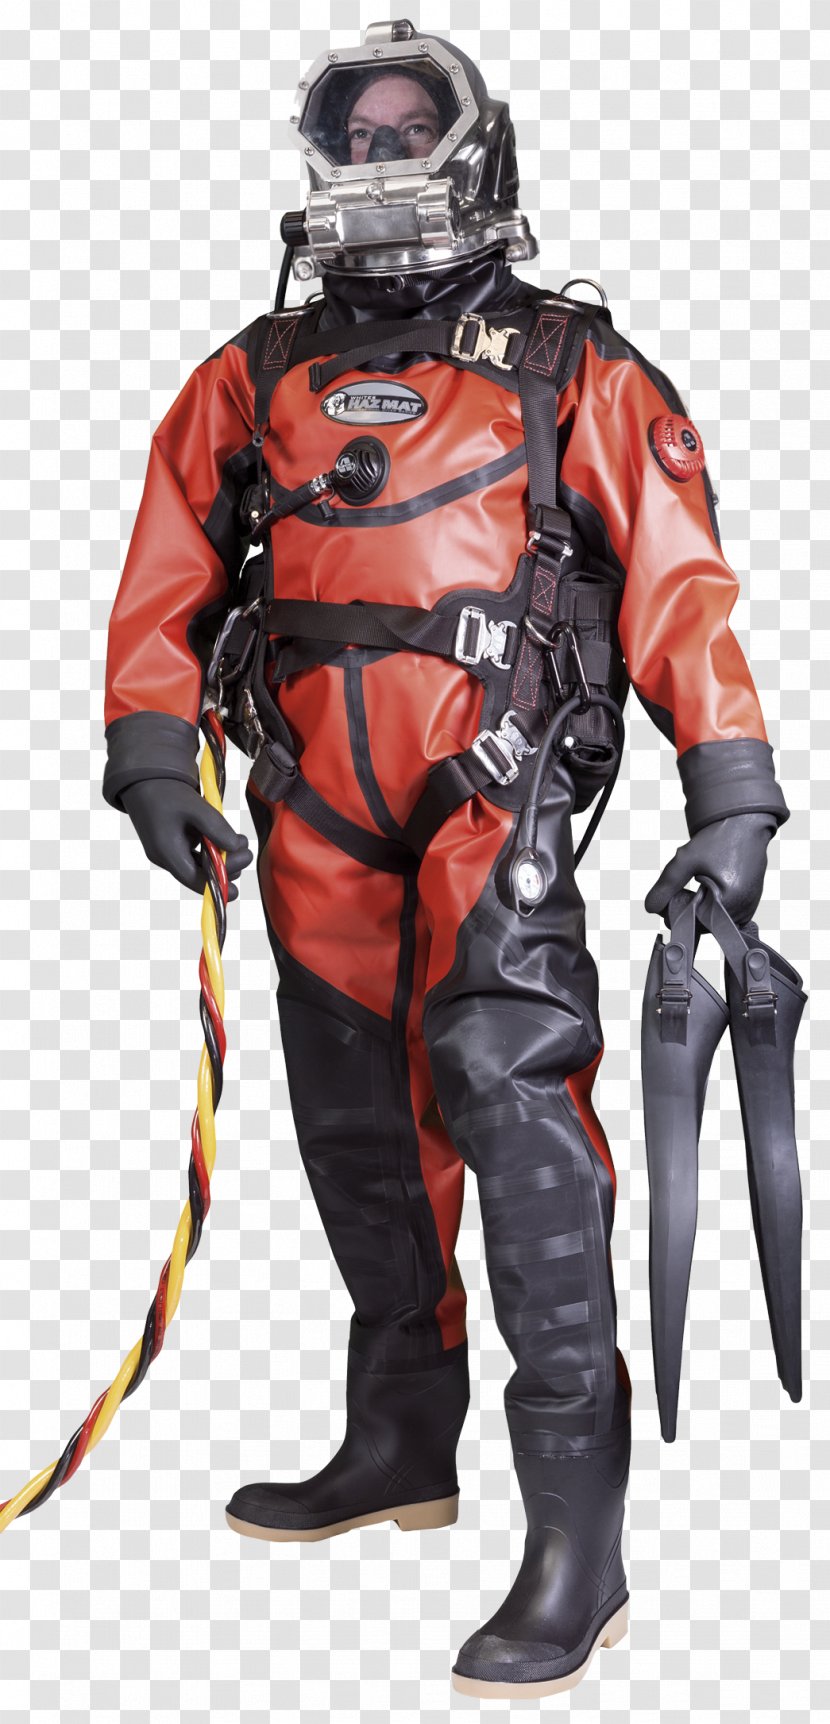 Dry Suit Helmet - Personal Protective Equipment - Profesional Transparent PNG